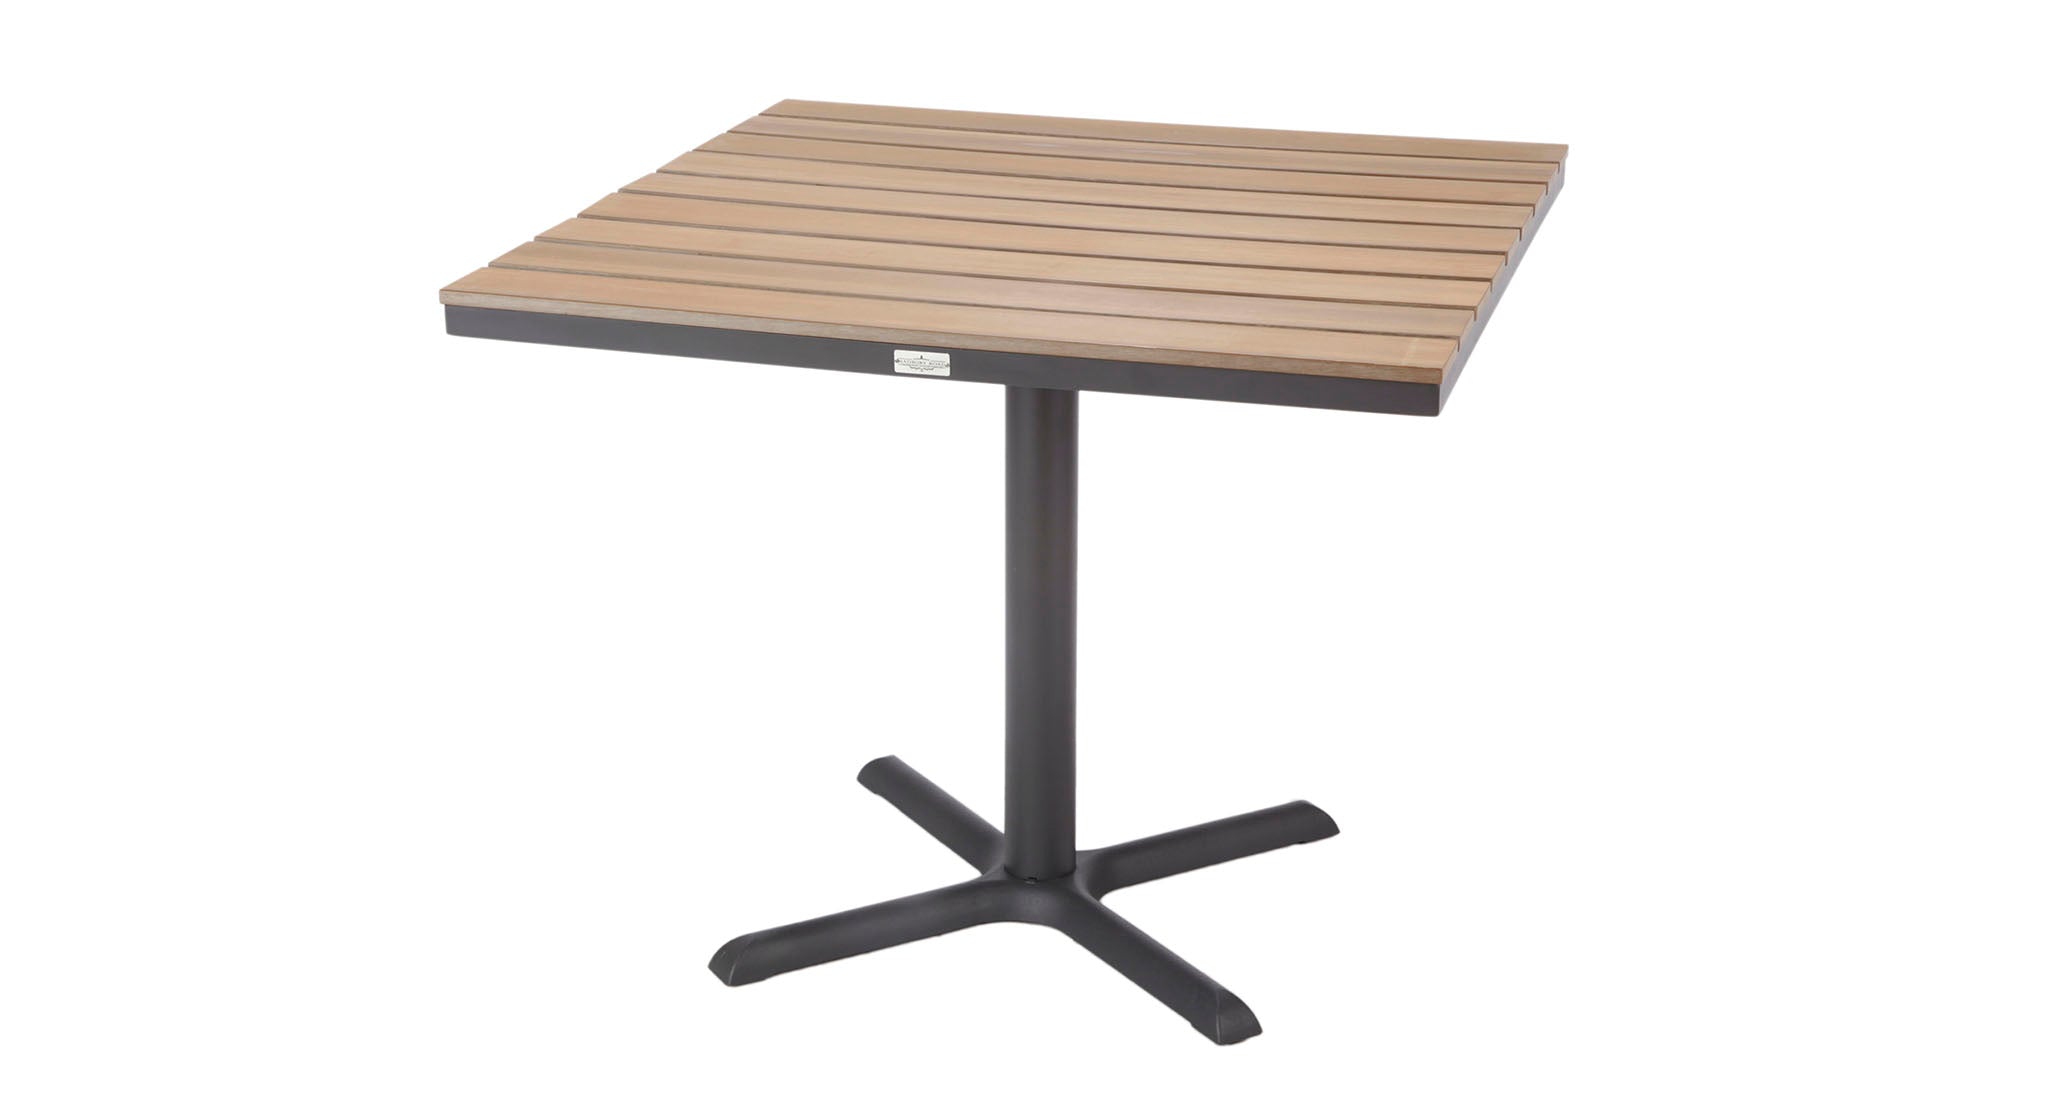 Asher outdoor 4 top dining table 2